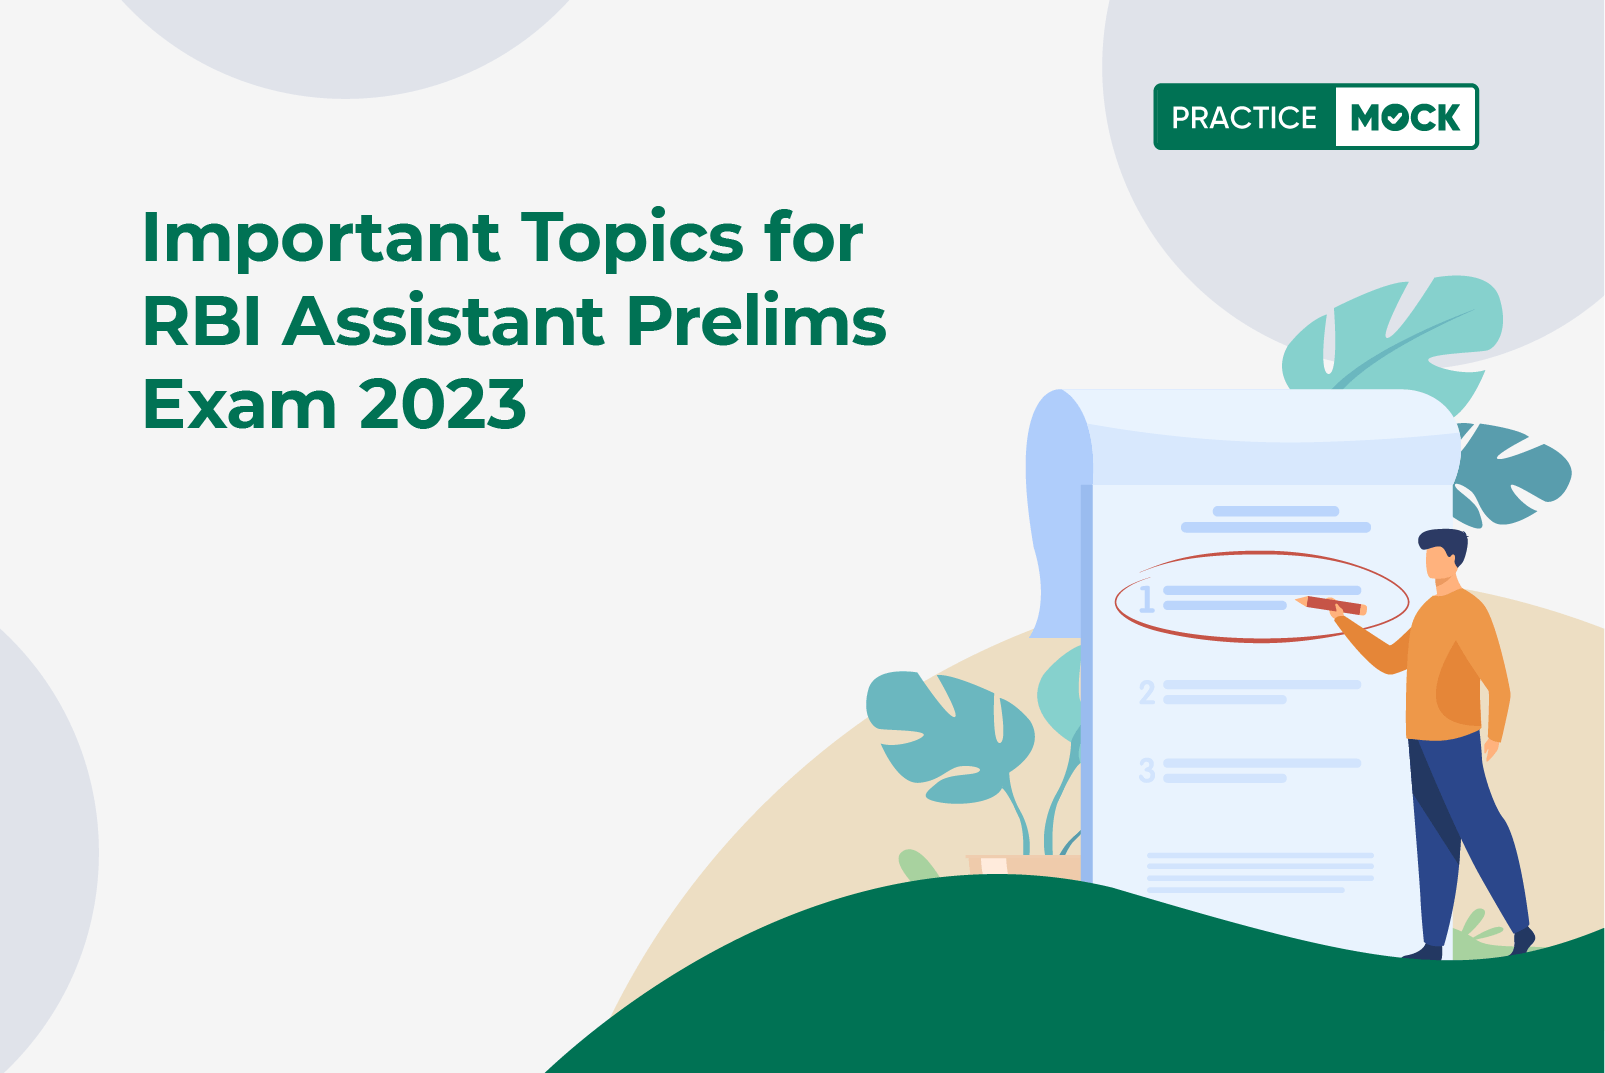 Important Topics for RBI Assistant Prelims 2023 Exam